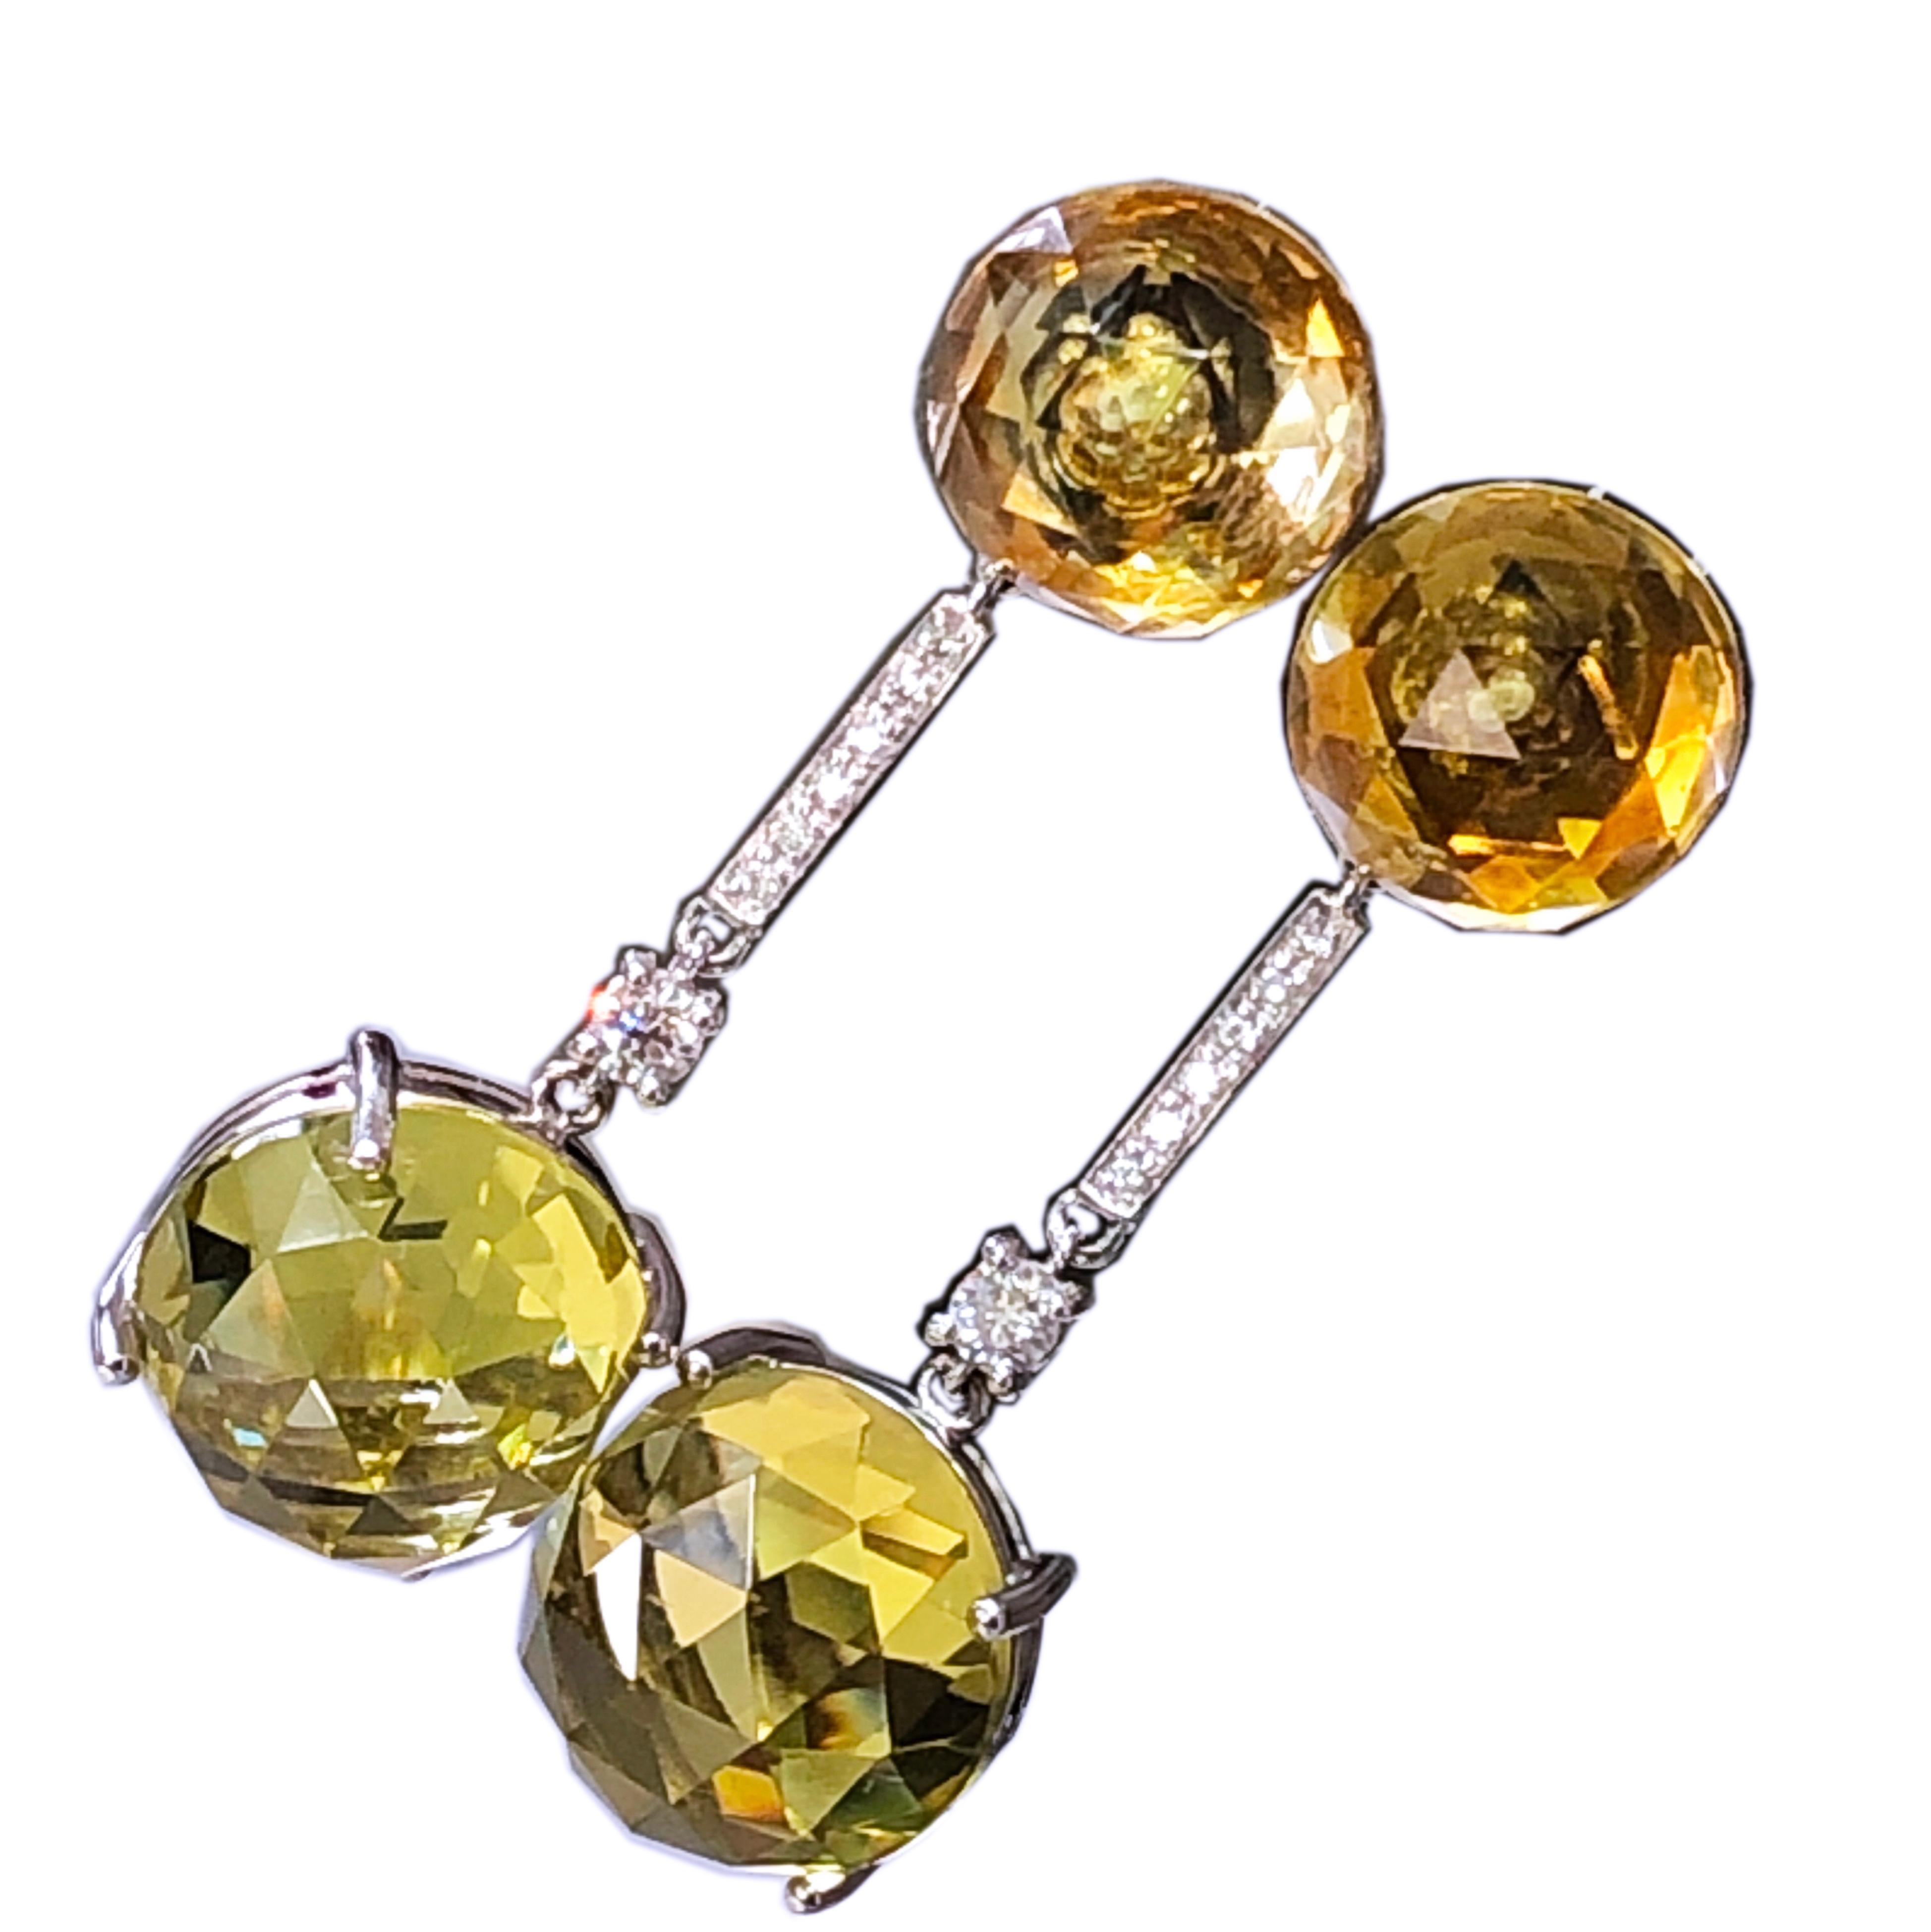 Chic yet timeless 36.50 Carat Faceted Cut Round Cabochon Natural Citrine Quartz in a 0.33 Carat White Diamond 18KT White Gold Setting Dangle Earrings.

In our smart fitted Burgundy Leather Case.
Total Lenght 1.96 inches